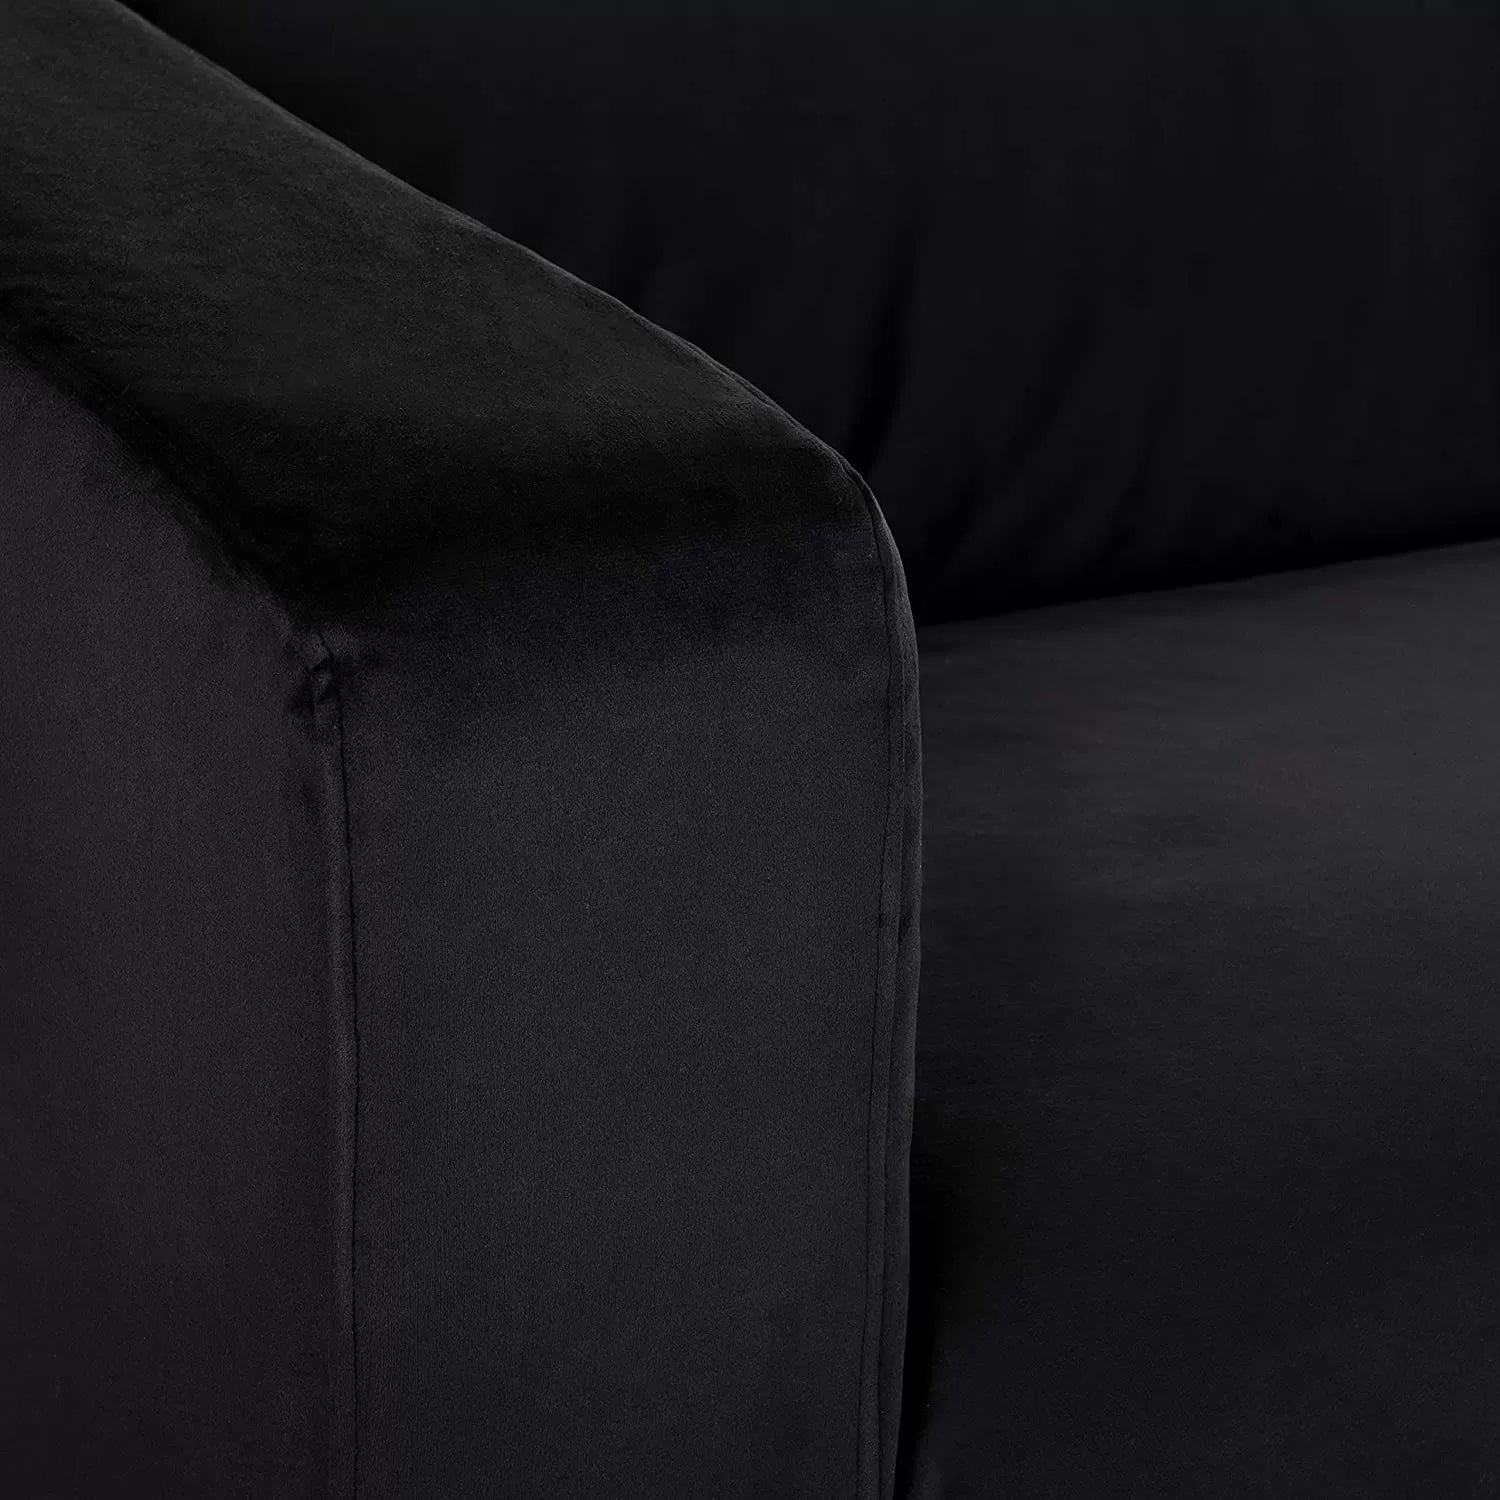 Ikea-Klippan-2-Seater-seat-Replacement-Sofa-cover-black-velvet-fabric-breathable